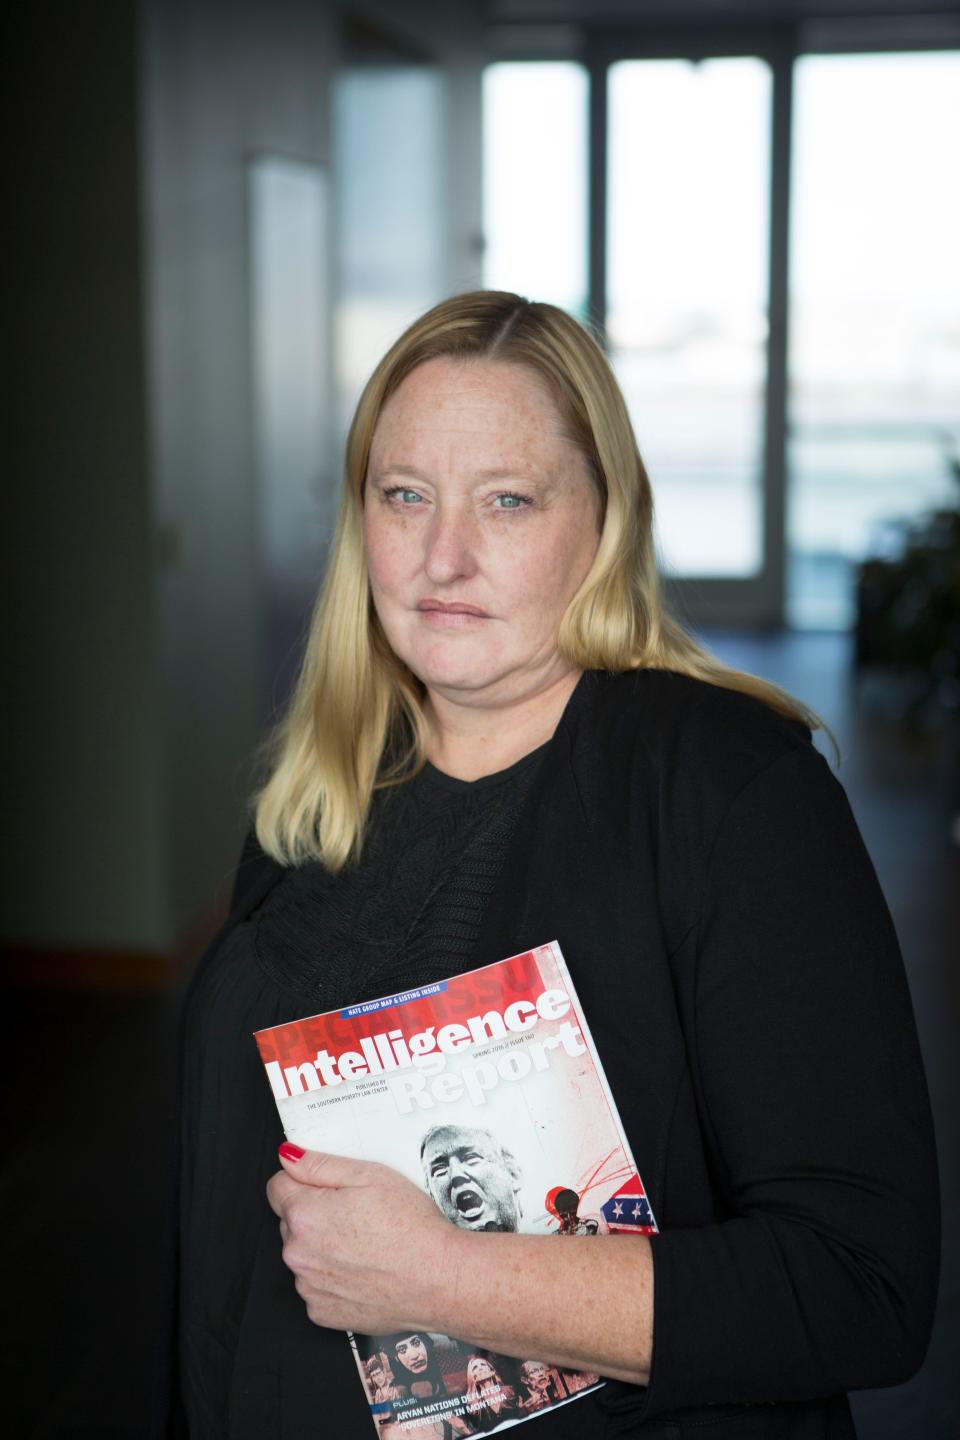 Heidi Beirich helps monitor hate groups for the SPLC.